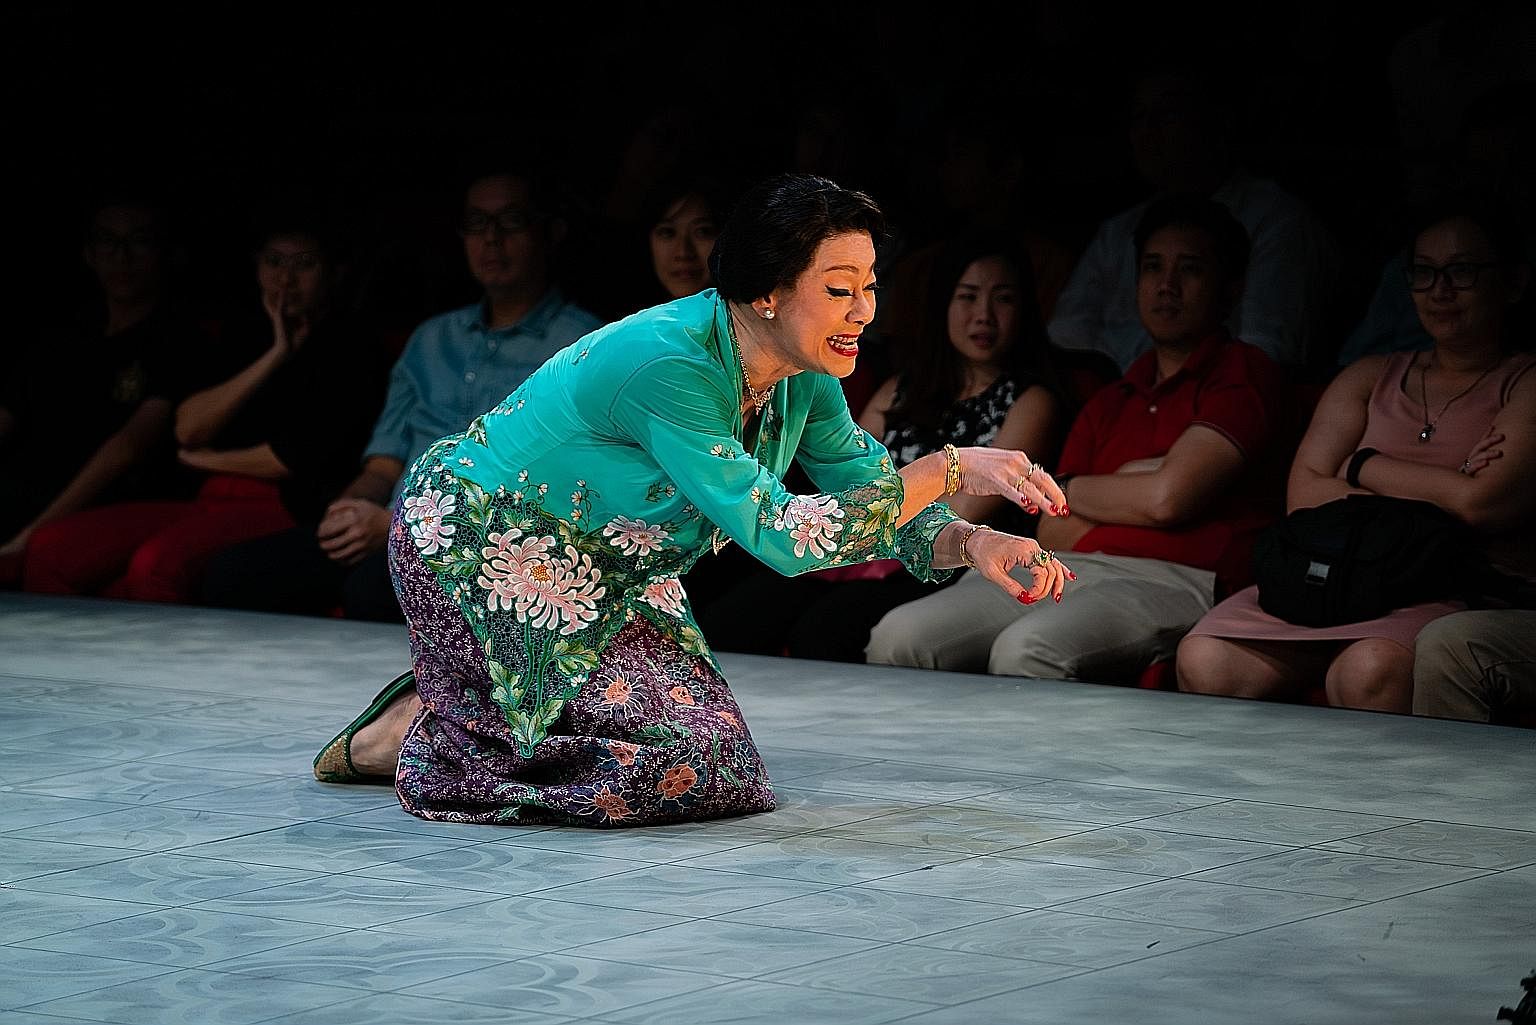 Ivan Heng in the play Emily Of Emerald Hill. The shutting down of theatres worldwide has resulted in a rush towards digitalisation of the art form, says the writer. However, he adds that the true pleasure of theatre lies in it being witnessed; active